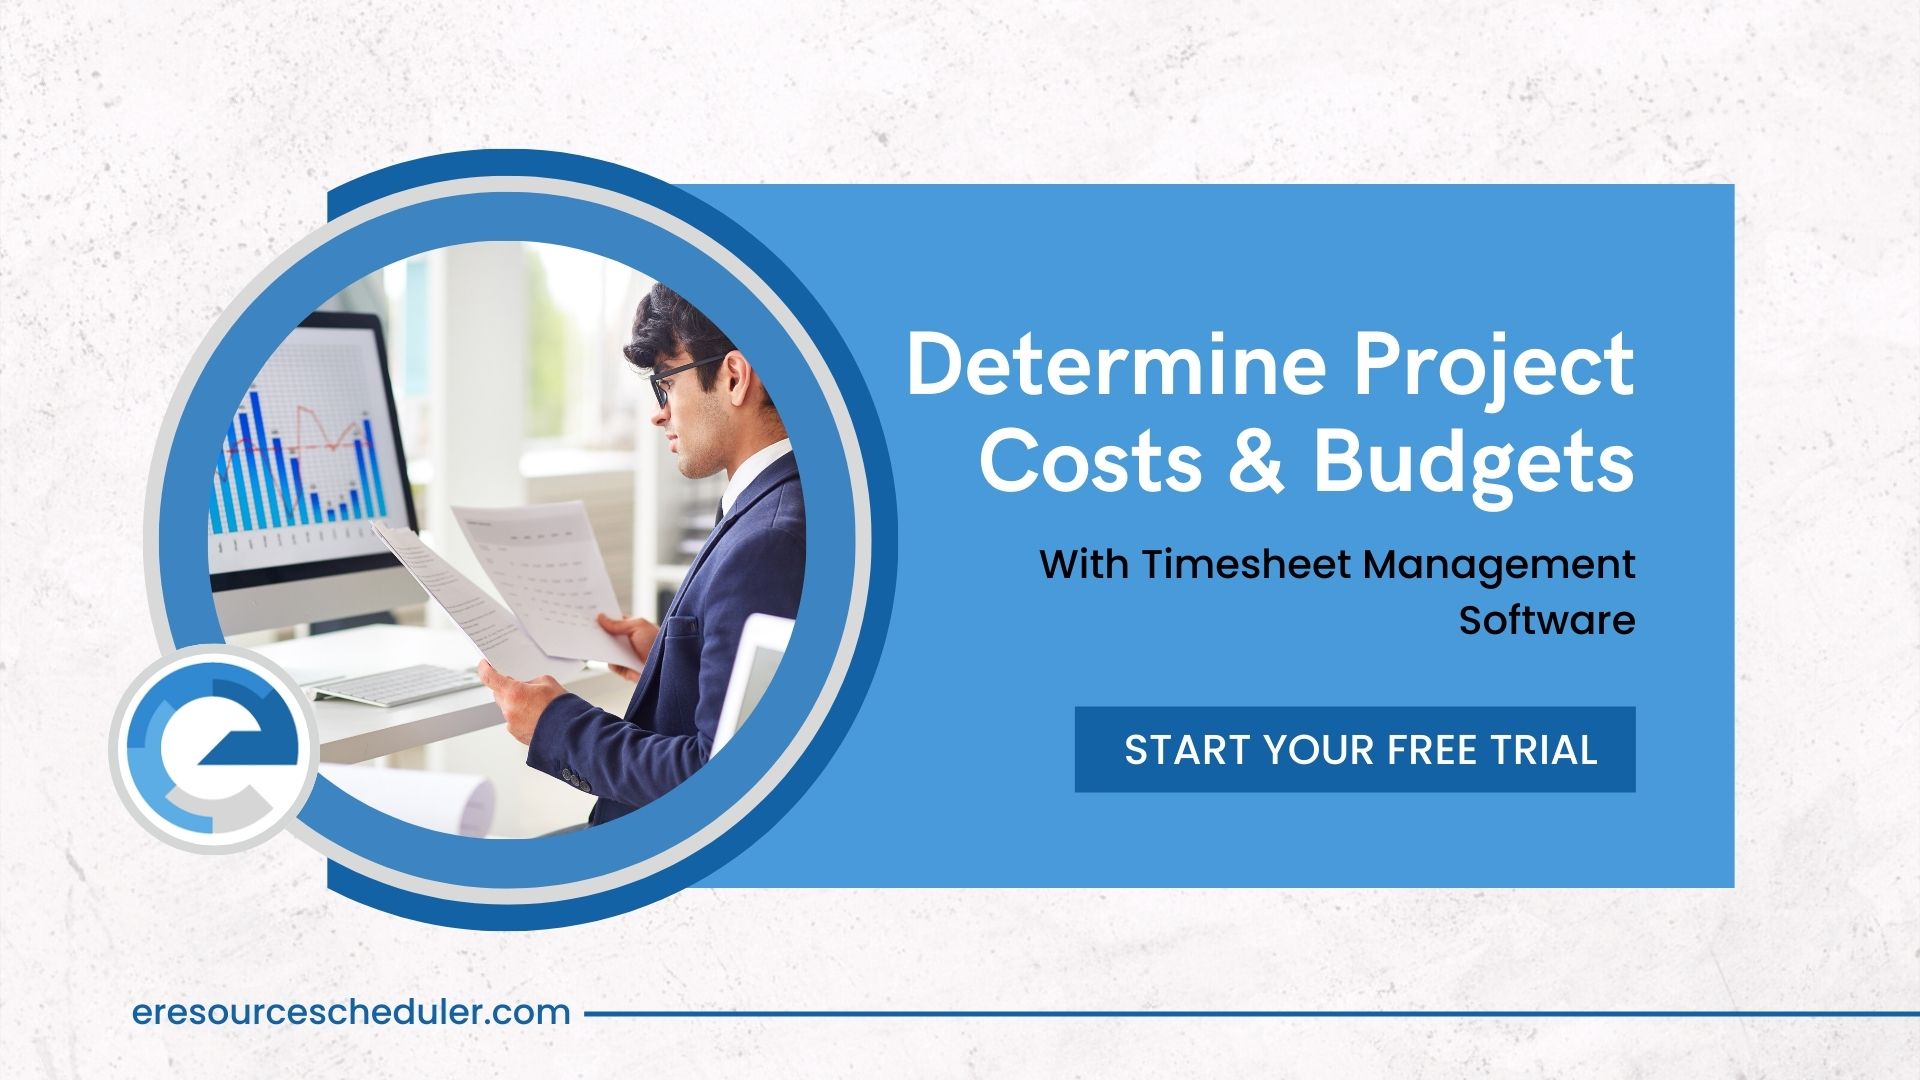 Determine project costs and budgets with Timesheet management software